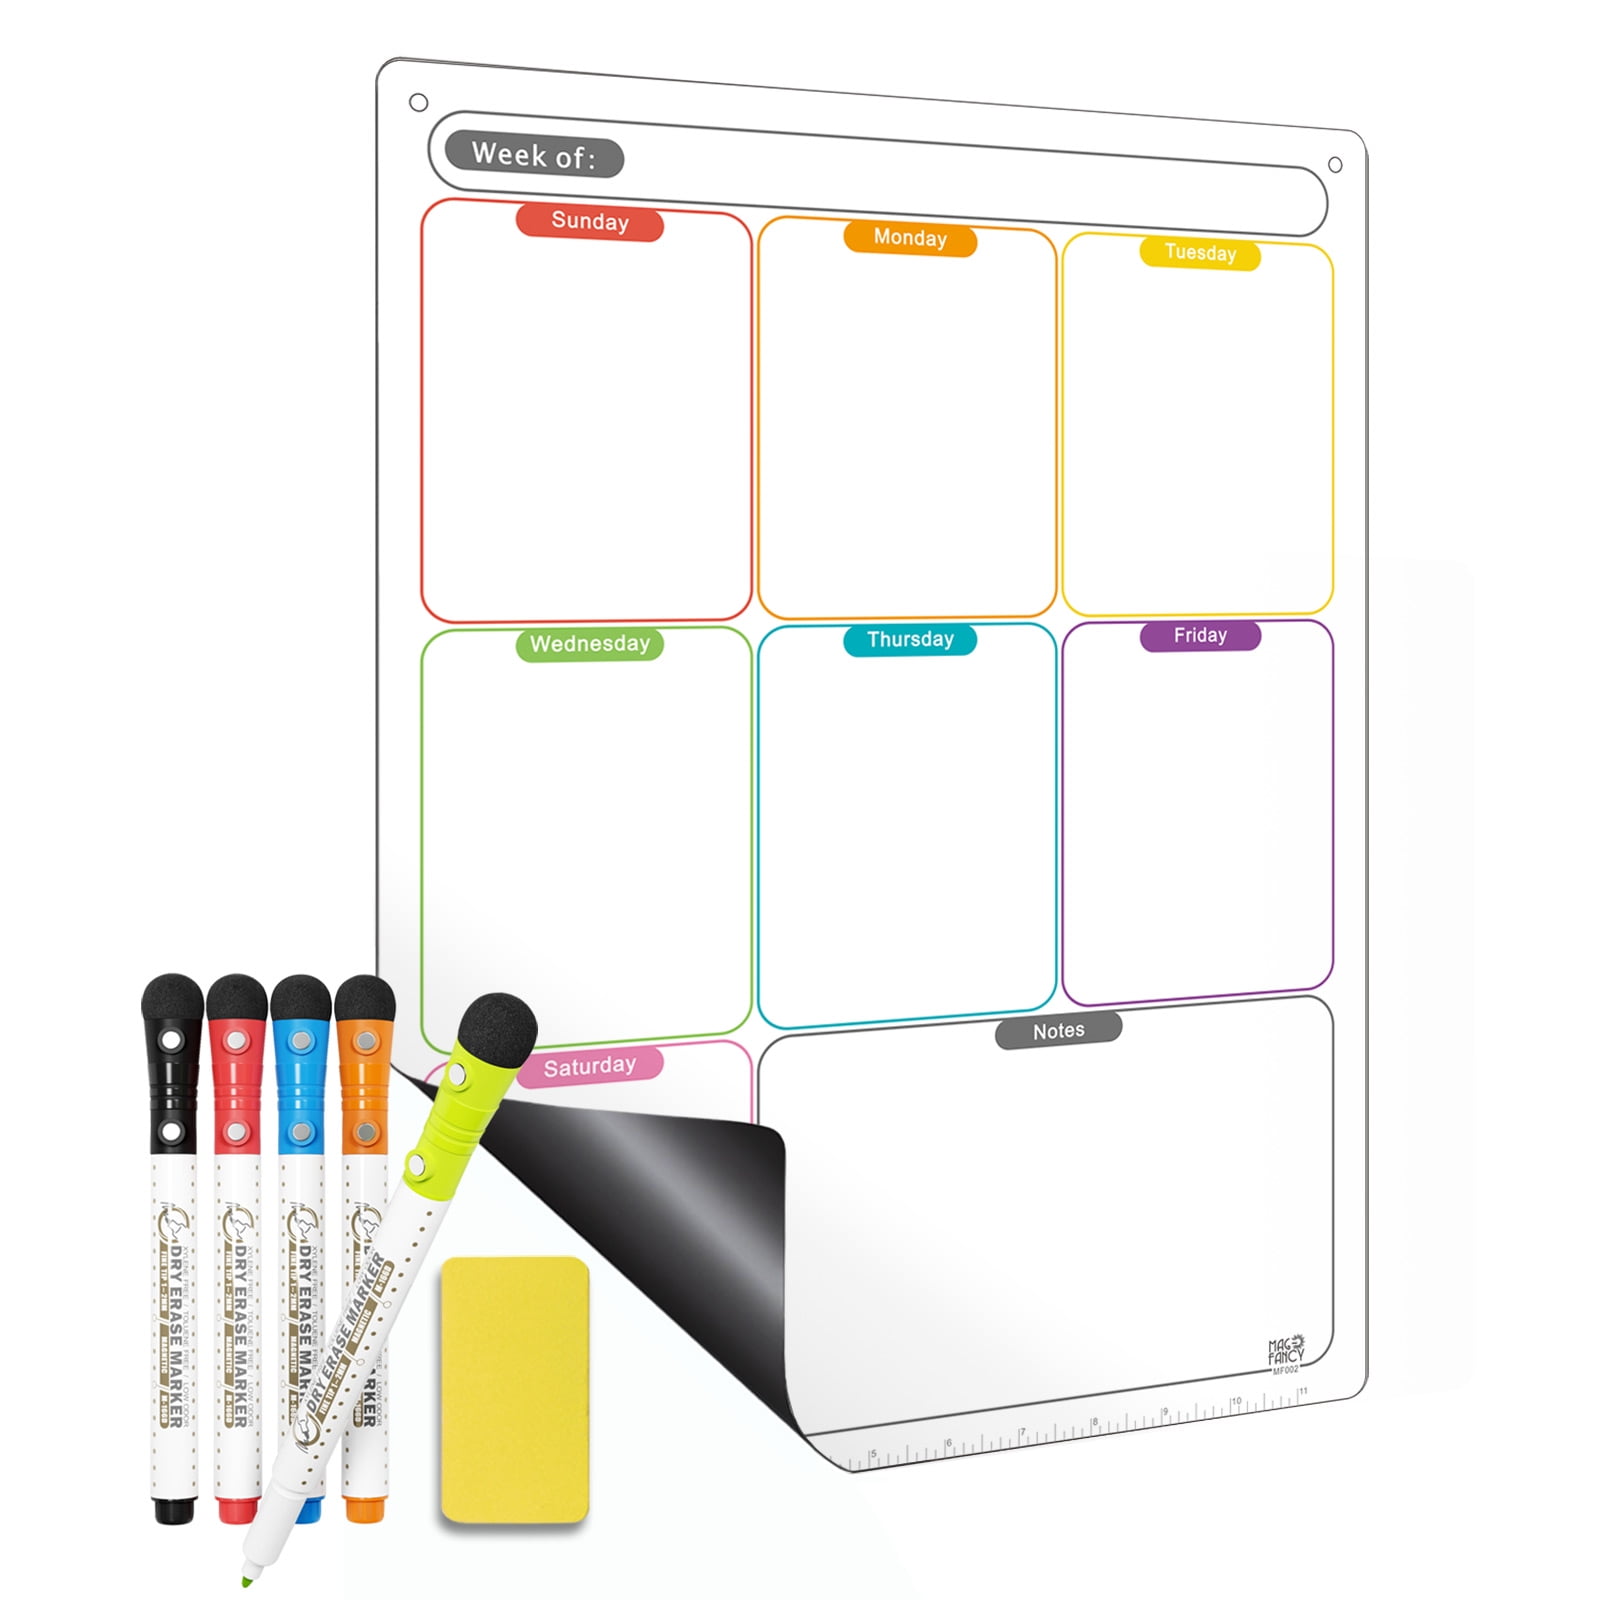 Acrylic Magnetic Weekly Calendar for Fridge, 16x 12 Clear Dry Erase  Calendar Board & Memo Board, Reusable Weekly Note Board/Meal Planner for